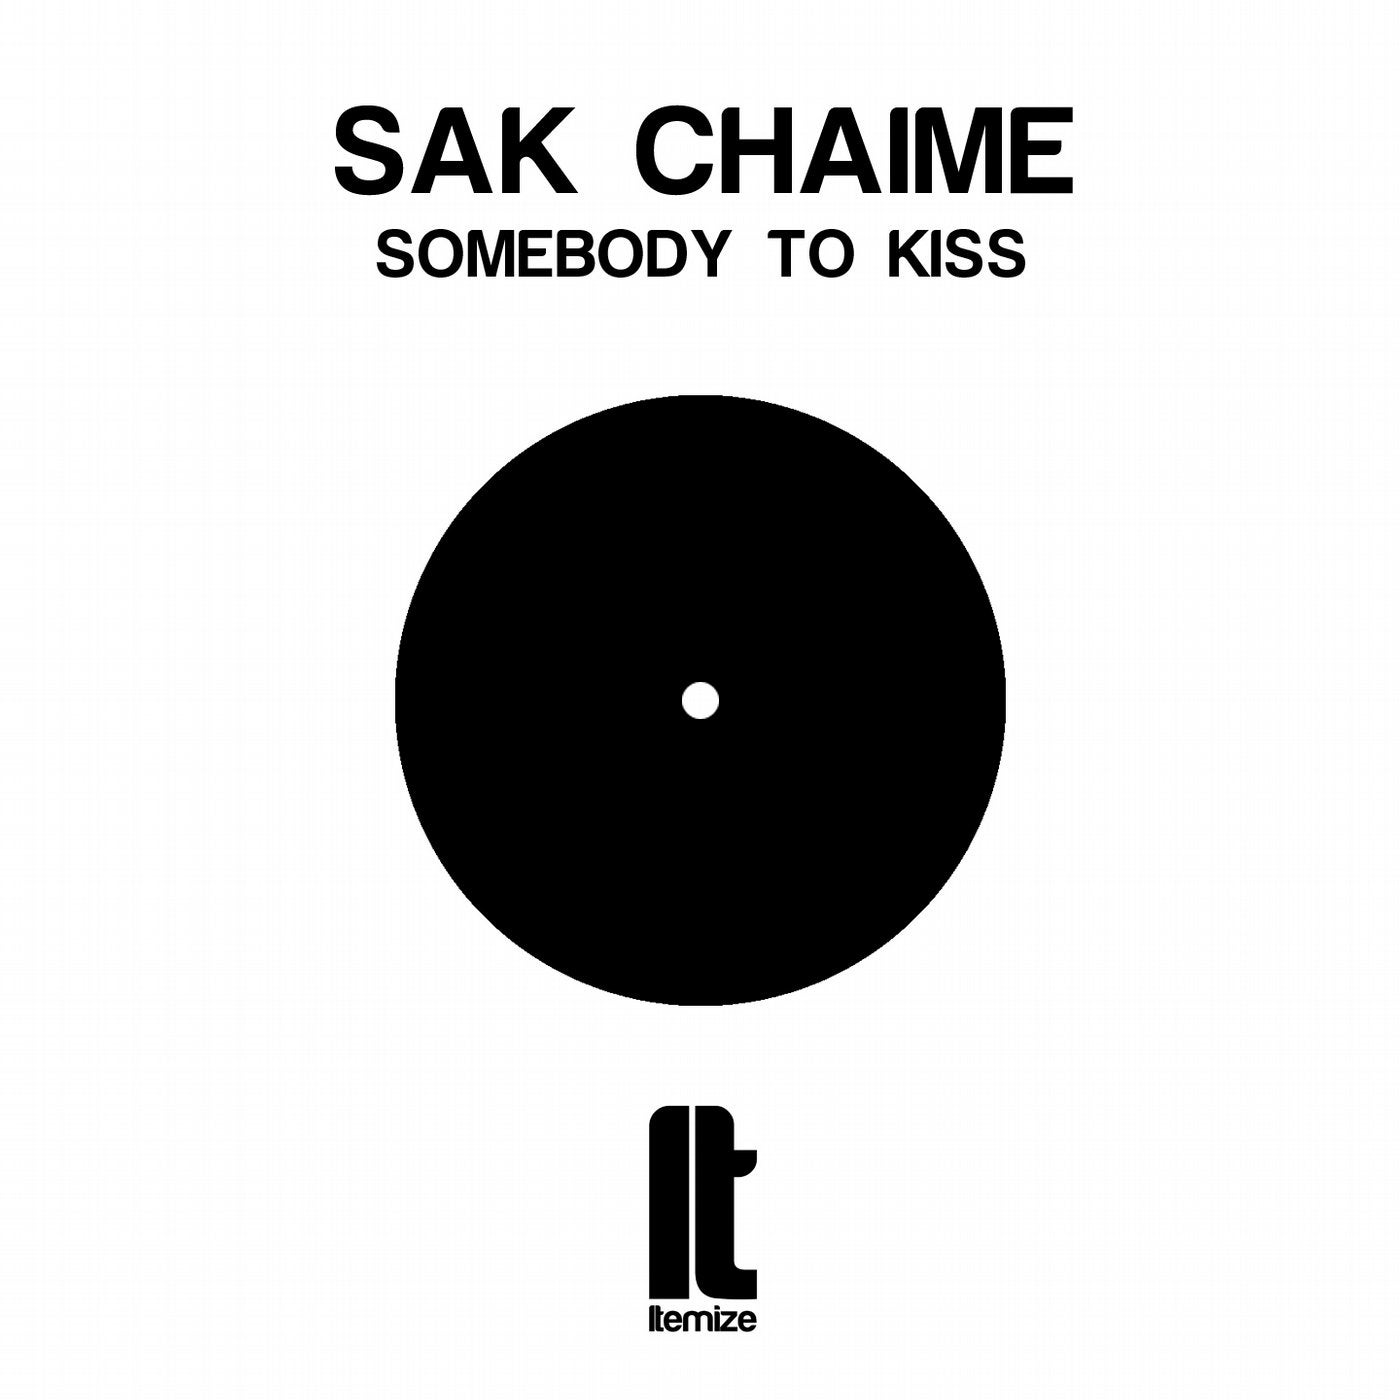 Somebody to kiss